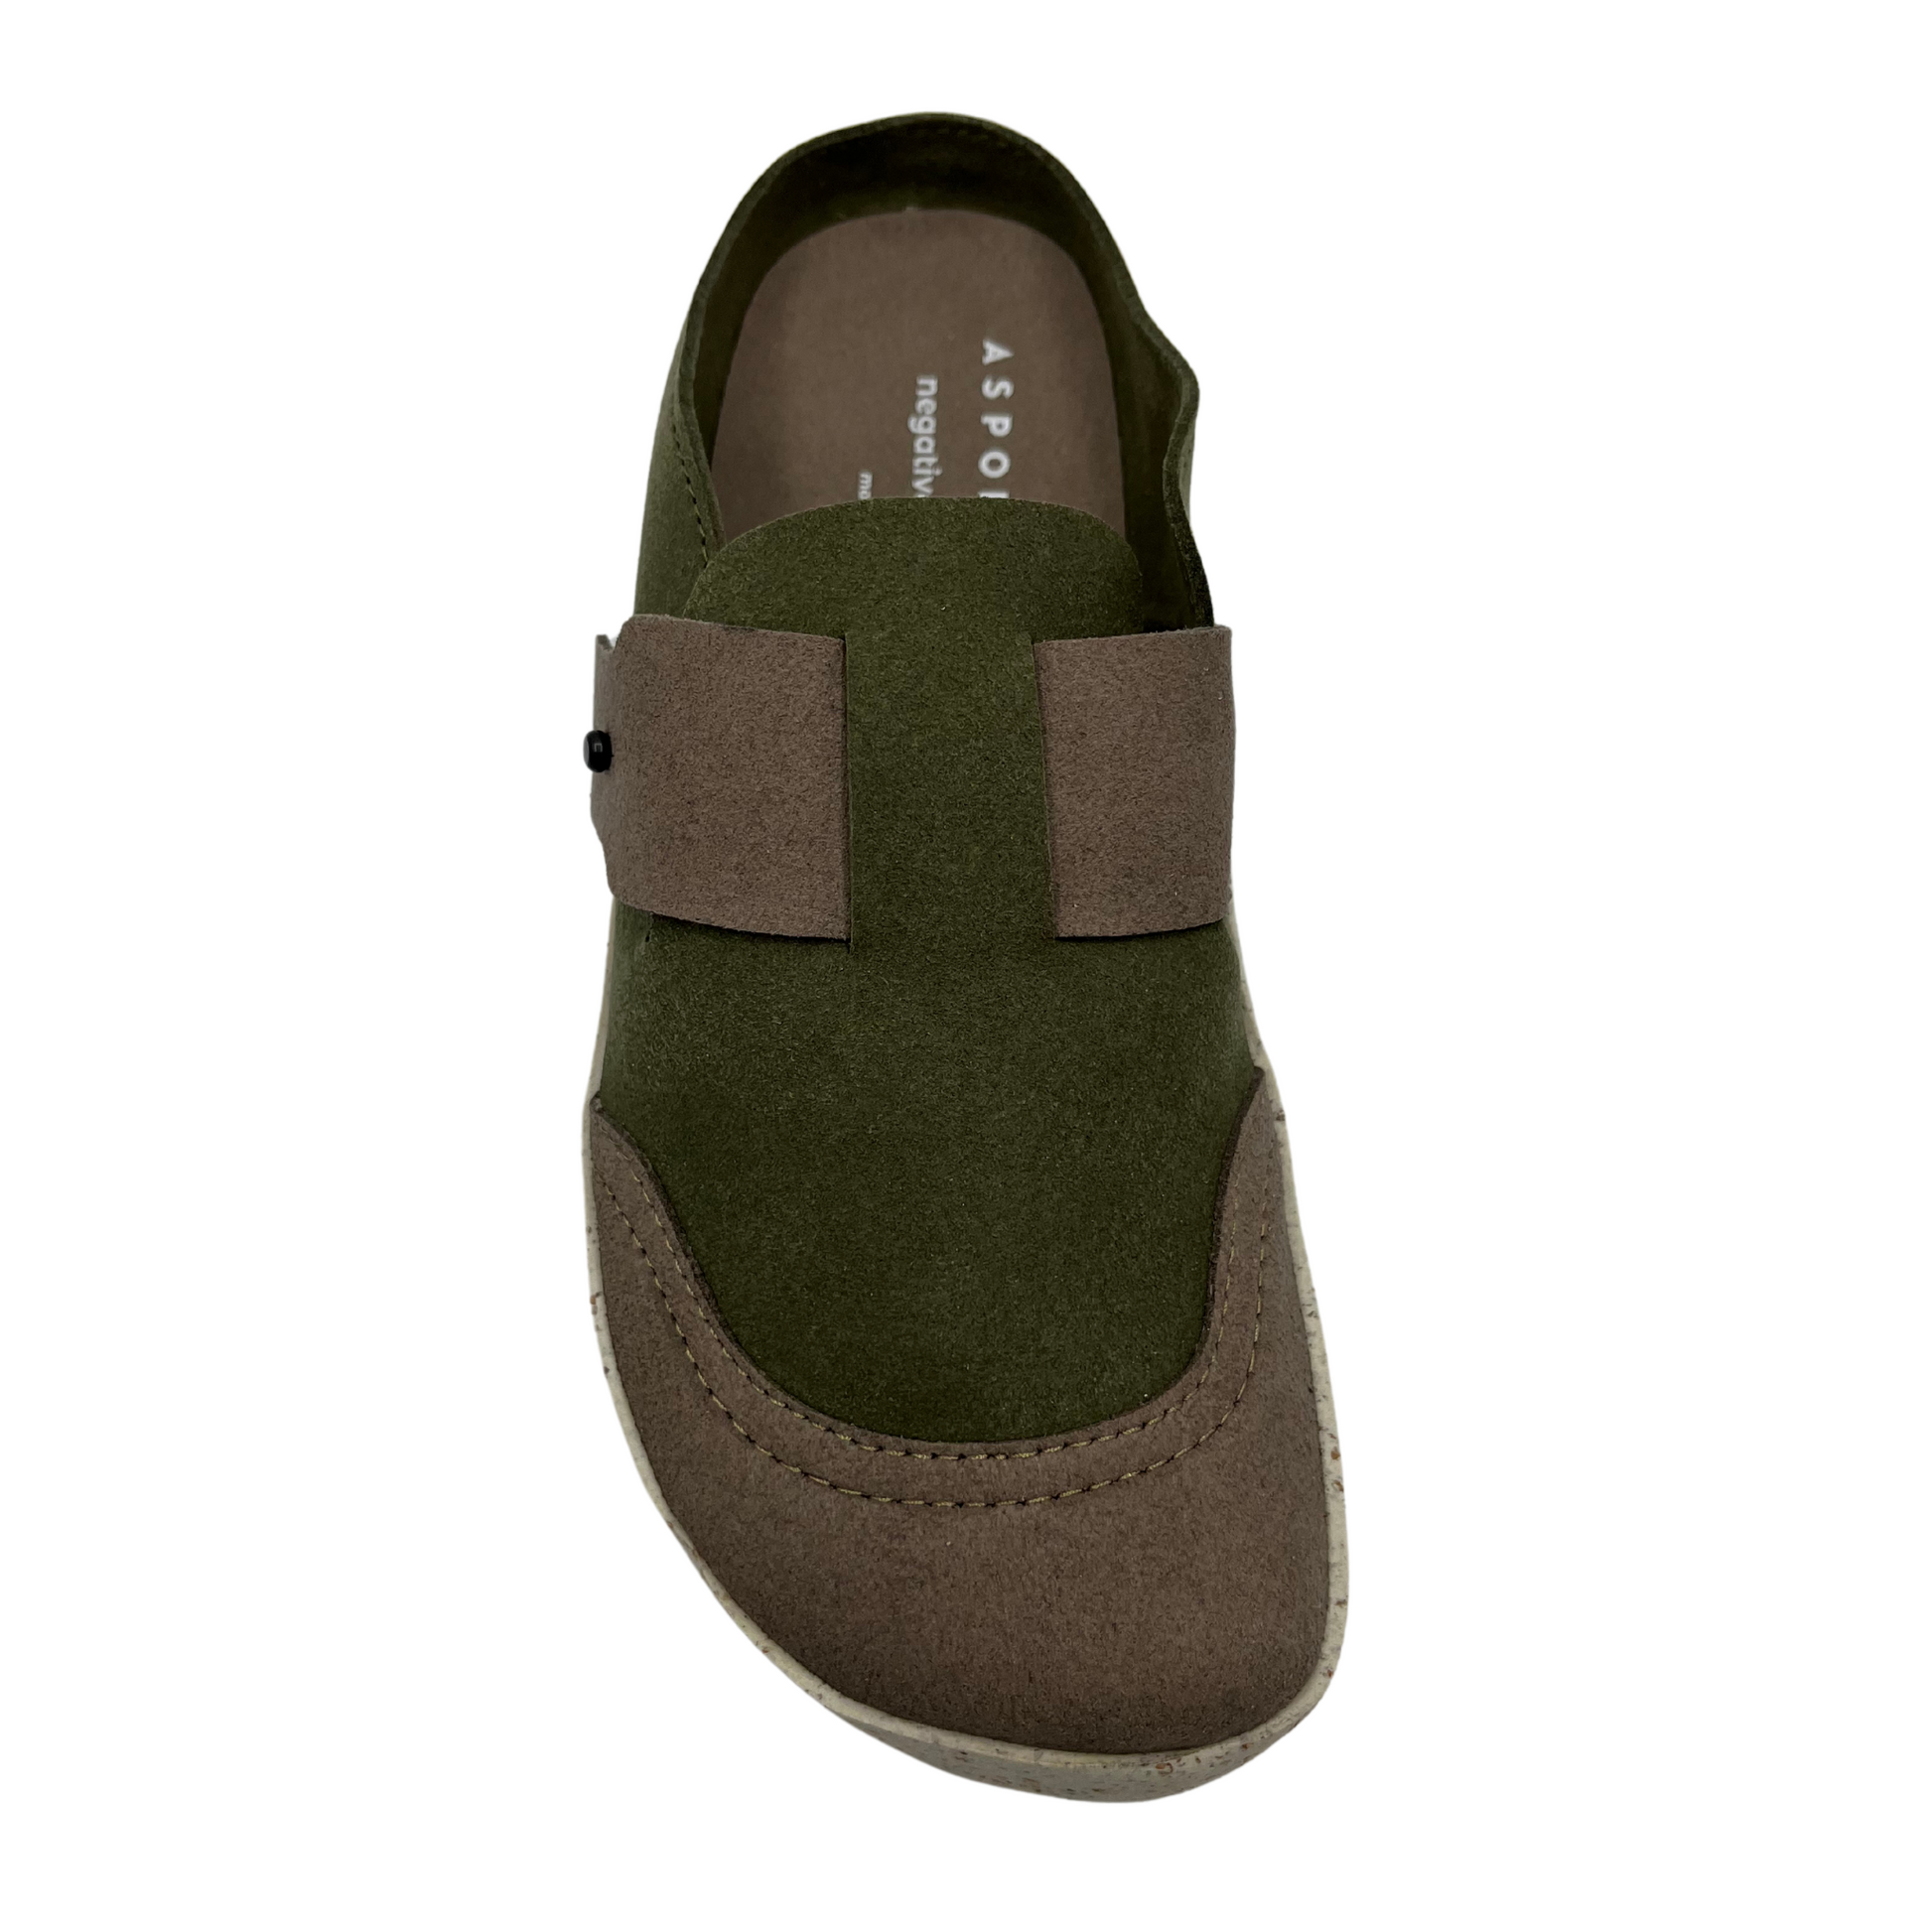 Top view of army green and taupe faux suede slip on clogs